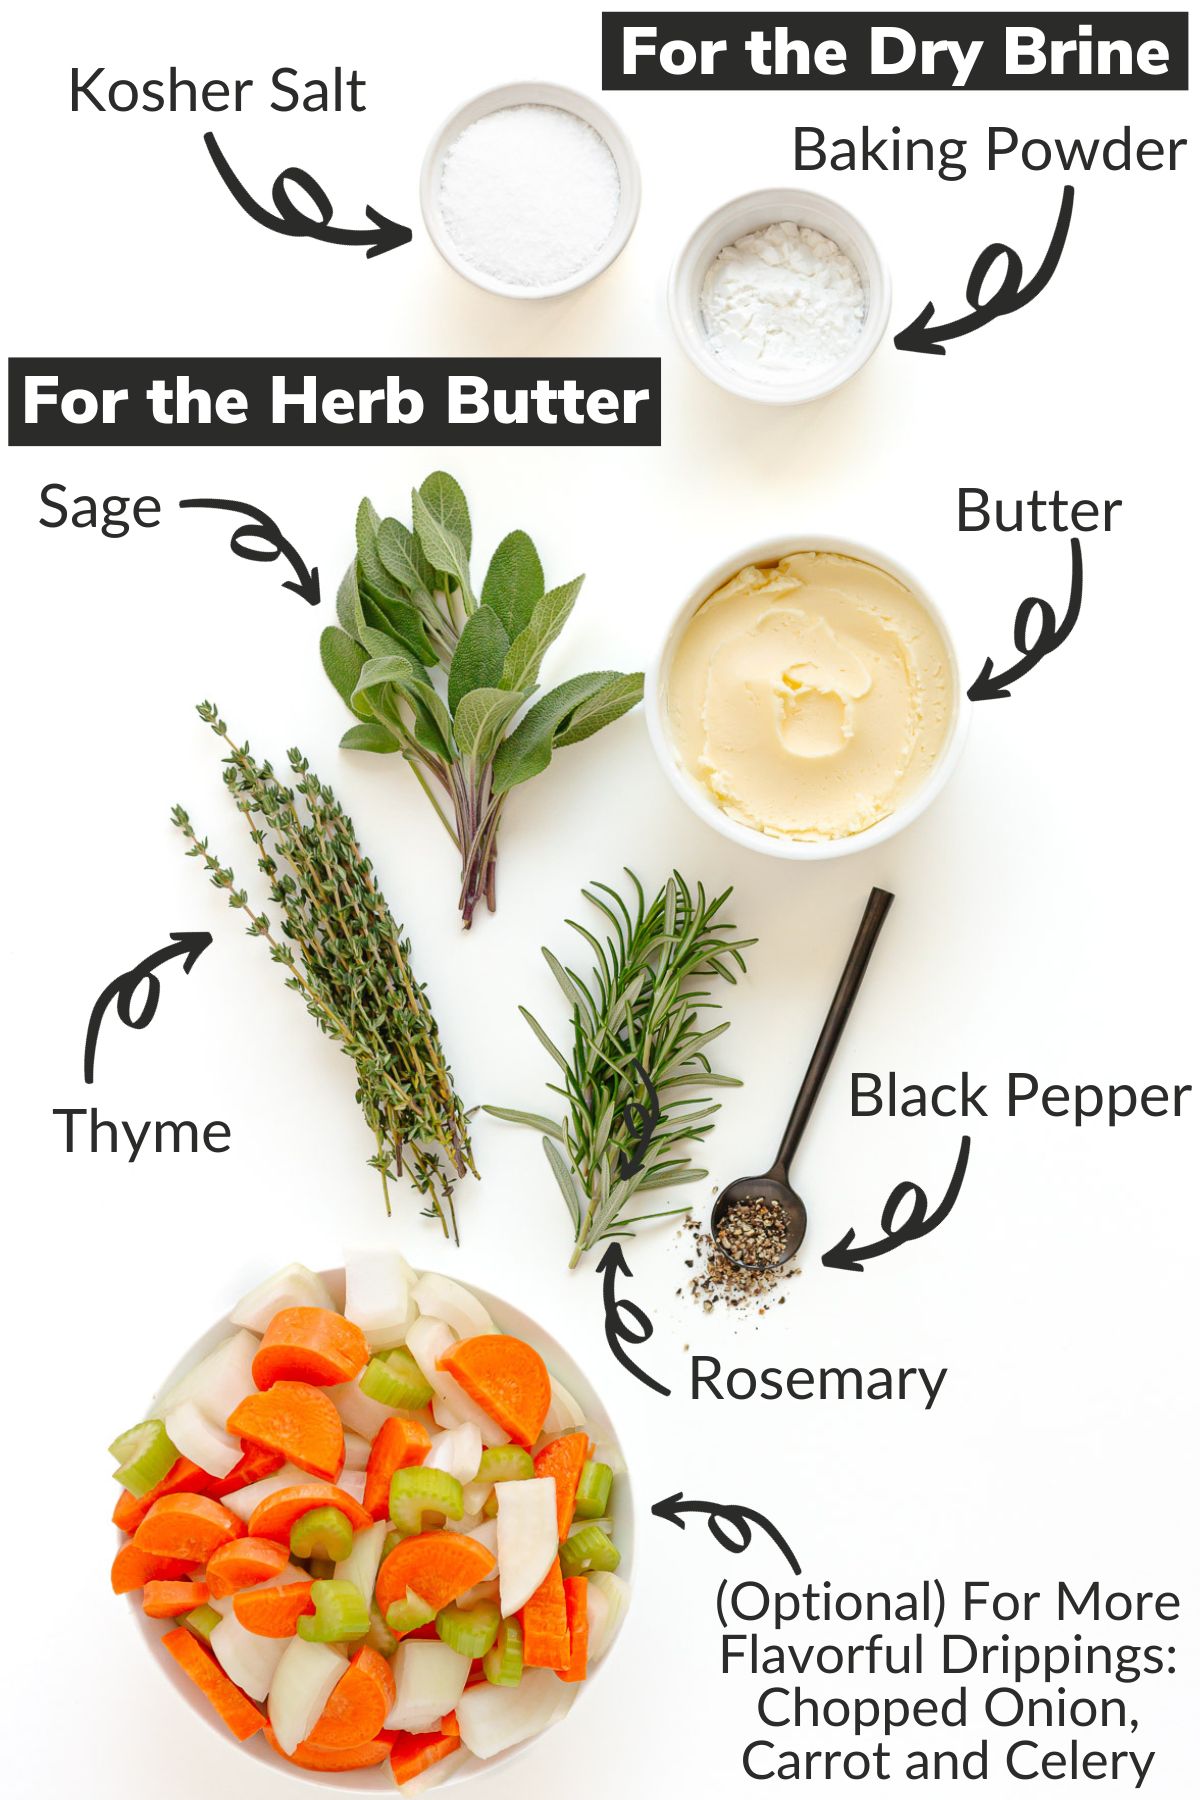 Labelled image of ingredients for dry brine turkey with herb butter.